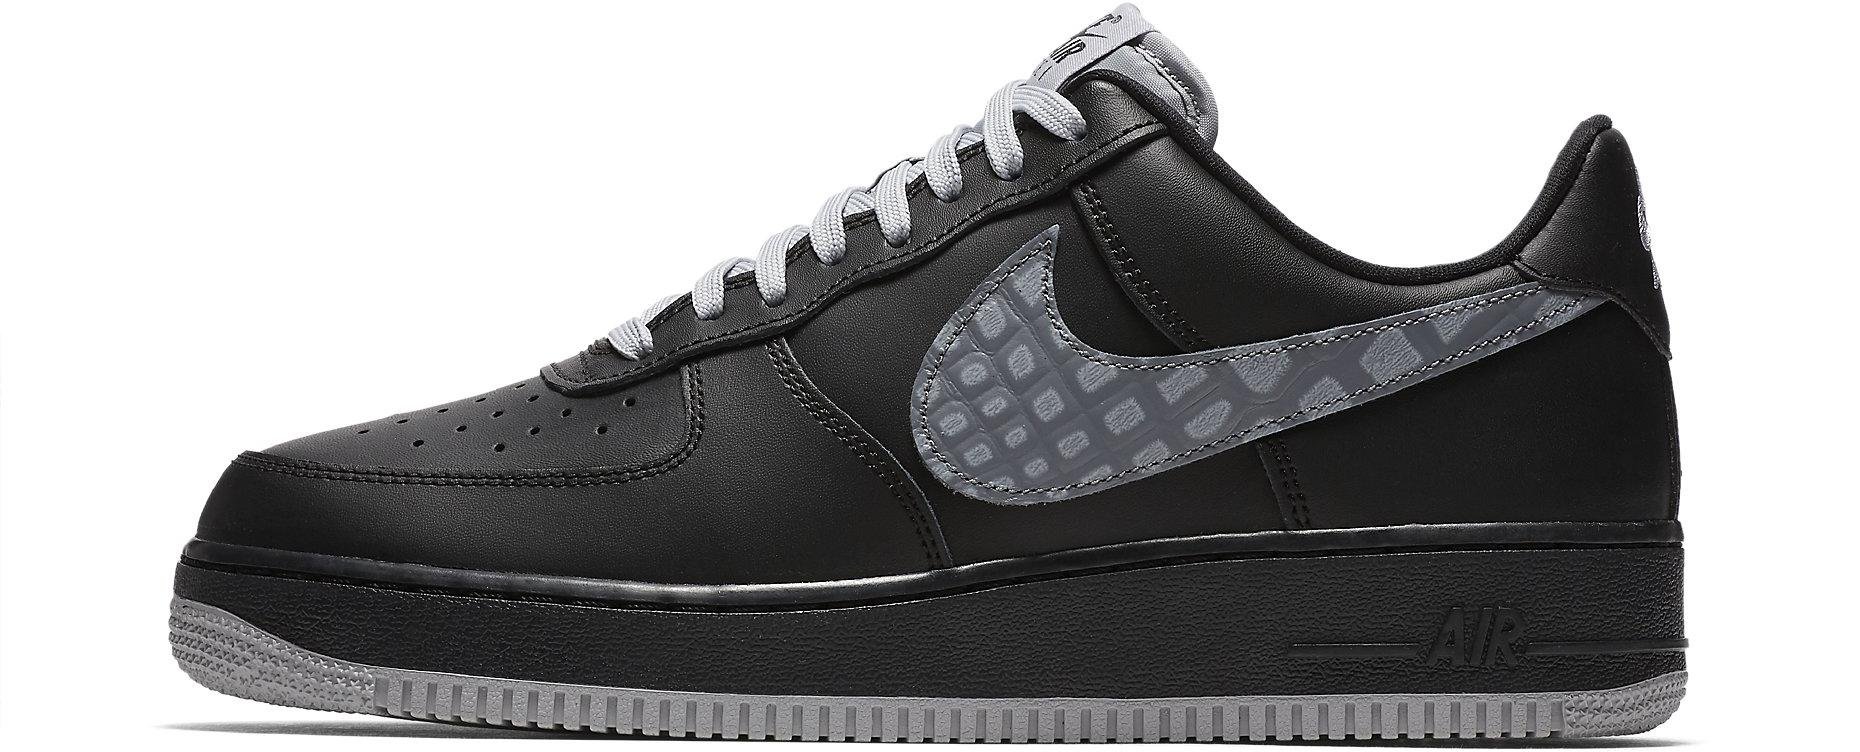 Air Force 1 LV8: A Modern Take on the Classic